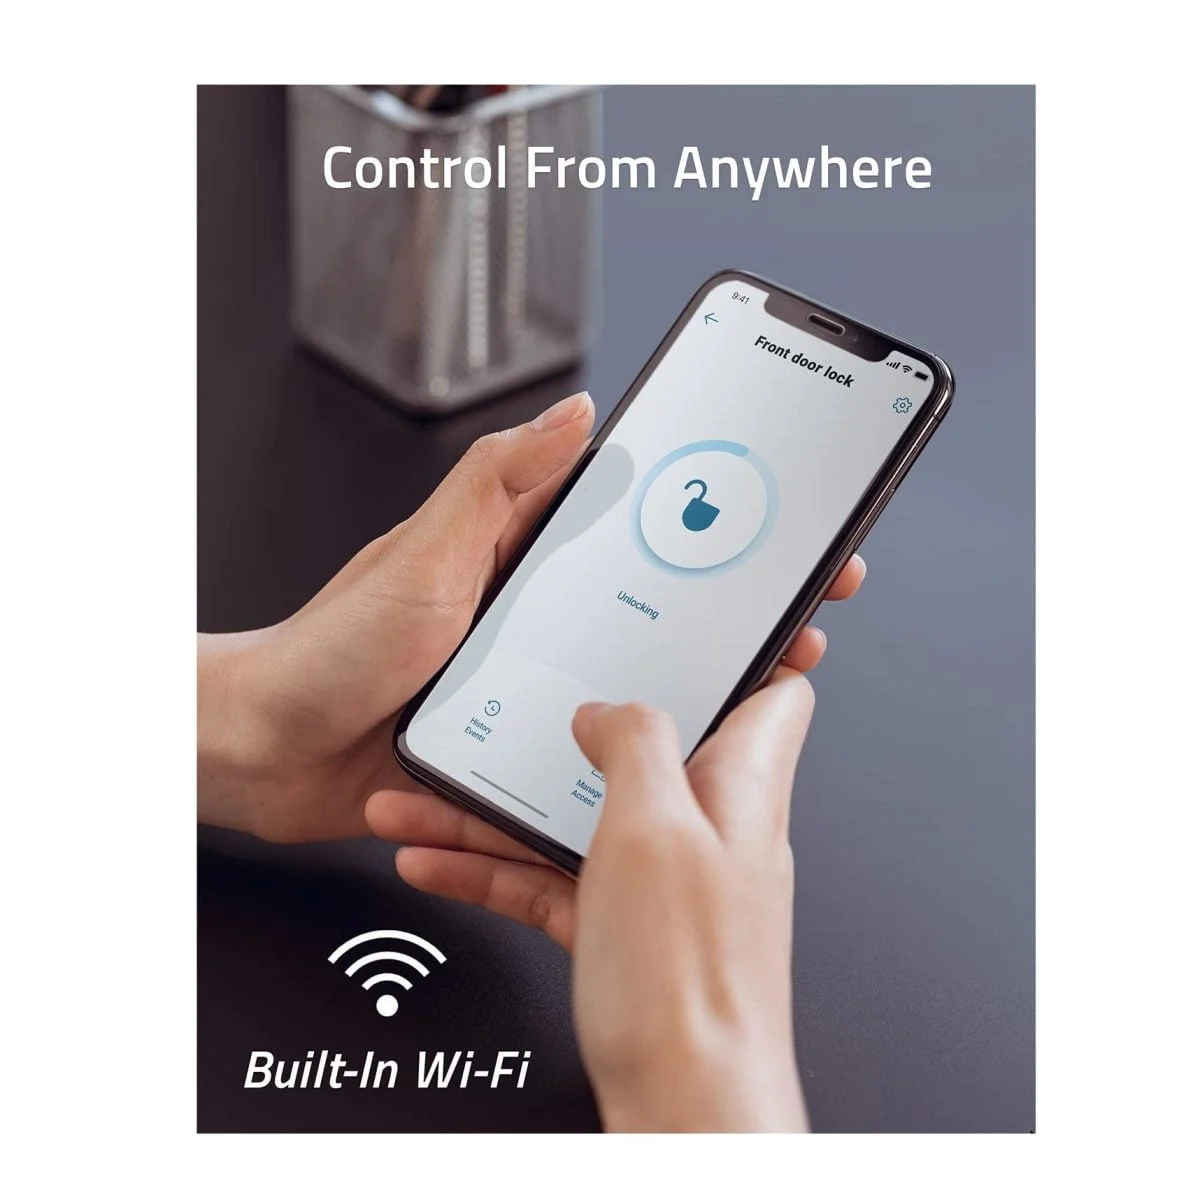 61Jryqbnwcl. Ac Sl1500 Eufy &Lt;H1 Class=&Quot;Product-Meta__Title Heading H1&Quot;&Gt;Eufy Security Smart Lock Touch And Wi-Fi&Lt;/H1&Gt; Https://Www.youtube.com/Watch?V=A_Ctk37Uap0 &Lt;Ul&Gt; &Lt;Li Class=&Quot;&Quot; Data-List=&Quot;Bullet1&Quot; Data-Start=&Quot;1&Quot;&Gt;&Lt;Strong&Gt;Your Finger Is The Key:&Lt;/Strong&Gt; Smart Lock Recognizes Your Fingerprint In Just 0.3 Seconds And Unlocks Your Door In 1 Second—It’s Faster Than Fumbling For Your Keys.&Lt;/Li&Gt; &Lt;/Ul&Gt; &Lt;Ul&Gt; &Lt;Li Class=&Quot;&Quot; Data-List=&Quot;Bullet1&Quot; Data-Start=&Quot;1&Quot;&Gt;&Lt;Strong&Gt;Control From Anywhere:&Lt;/Strong&Gt; With Its All-New Wi-Fi Connectivity, You Can Control Smart Lock From Absolutely Anywhere Via The Eufy Security App.&Lt;/Li&Gt; &Lt;/Ul&Gt; &Lt;Ul&Gt; &Lt;Li Class=&Quot;&Quot; Data-List=&Quot;Bullet1&Quot; Data-Start=&Quot;1&Quot;&Gt;&Lt;Strong&Gt;Always Has Your Back:&Lt;/Strong&Gt; Even When You’re In A Hurry, Smart Lock Is Ready To Protect Your Home. A Built-In Sensor Detects When Your Door Is Closed And Locks It Automatically Behind You, Every Time.&Lt;/Li&Gt; &Lt;/Ul&Gt; &Lt;Ul&Gt; &Lt;Li Class=&Quot;&Quot; Data-List=&Quot;Bullet1&Quot; Data-Start=&Quot;1&Quot;&Gt;&Lt;Strong&Gt;Multiple Ways To Unlock:&Lt;/Strong&Gt; Open Smart Lock Using Your Fingerprint, With Your Phone Via The Eufy Security App, Or By Using The Keypad Or Key.&Lt;/Li&Gt; &Lt;/Ul&Gt; &Lt;Ul&Gt; &Lt;Li Class=&Quot;&Quot; Data-List=&Quot;Bullet1&Quot; Data-Start=&Quot;1&Quot;&Gt;&Lt;Strong&Gt;Built To Last:&Lt;/Strong&Gt; With A Sturdy Zinc Alloy And Stainless Steel Frame, Smart Lock Is Tested To Handle The Comings And Goings Of A Busy Household For Over 30 Years. The Ip65 Rating Ensures That Come Rain Or Shine, Your Front Door Is Protected.&Lt;/Li&Gt; &Lt;/Ul&Gt; &Lt;H5&Gt;Warranty: Eufy Product Warranty&Lt;/H5&Gt; Smart Lock Eufy Security Smart Lock Touch And Wi-Fi T8520111